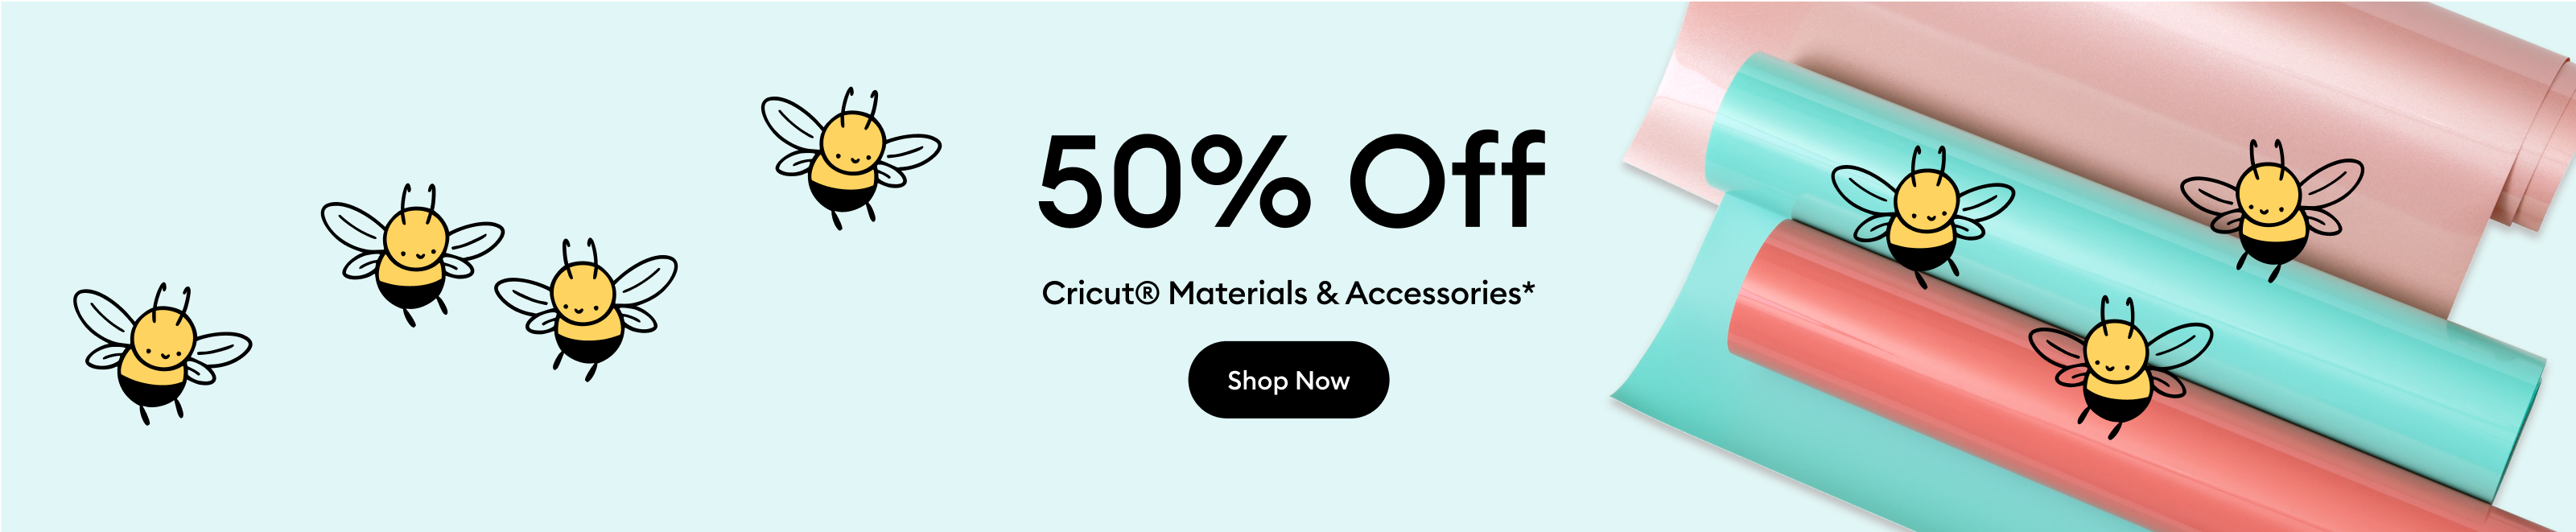 Save 50% on materials & accessories